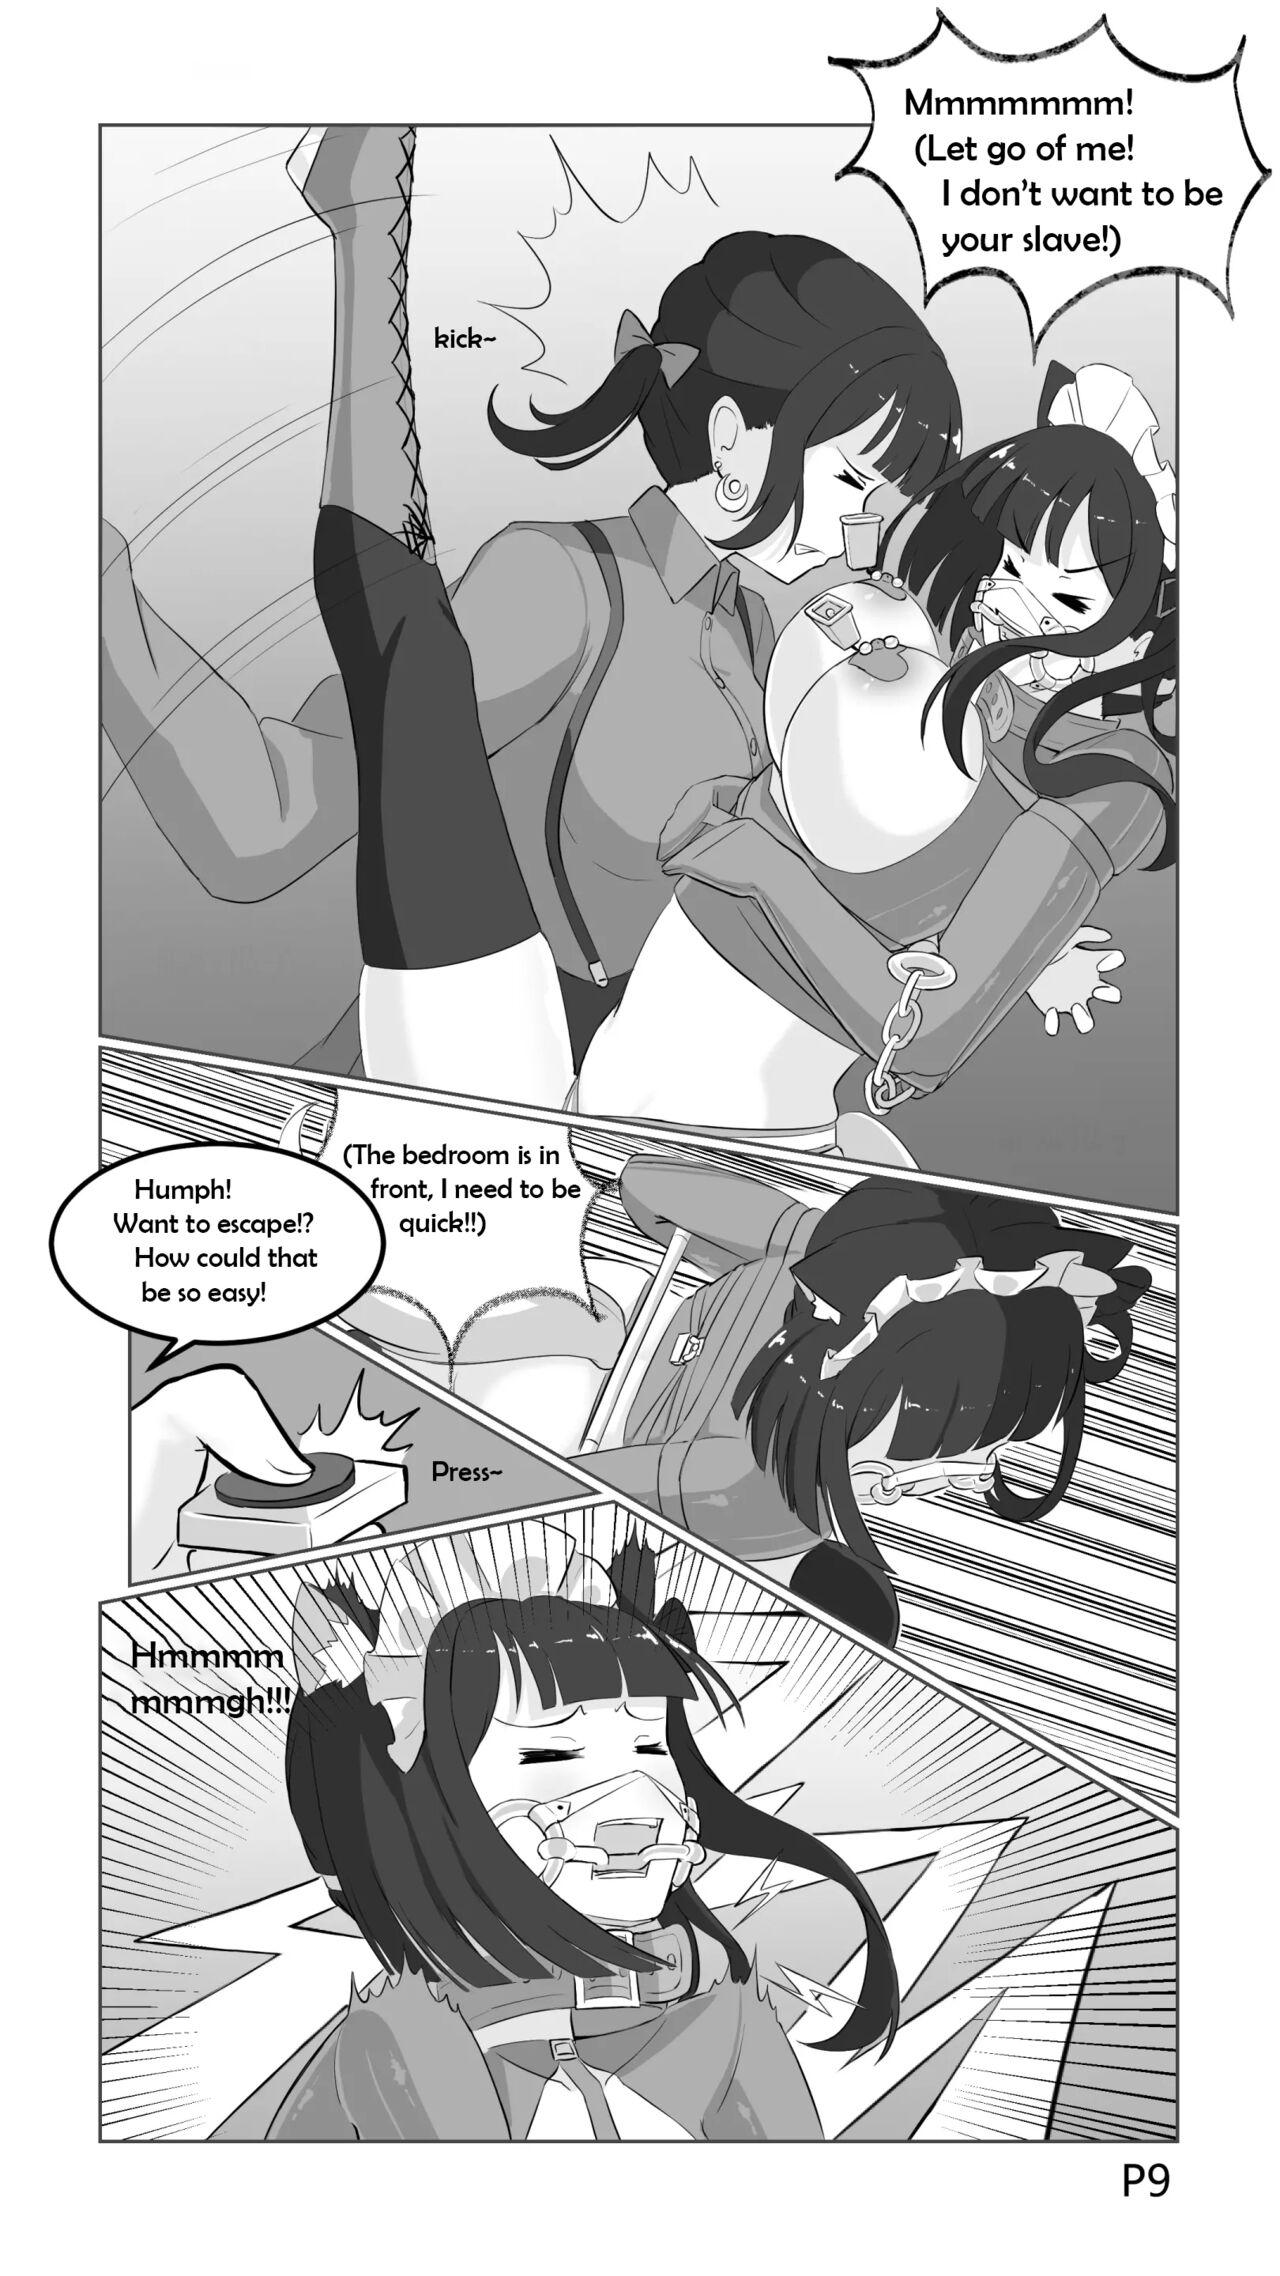 Pale Trap for catching ponies - Original Best Blow Job - Page 9